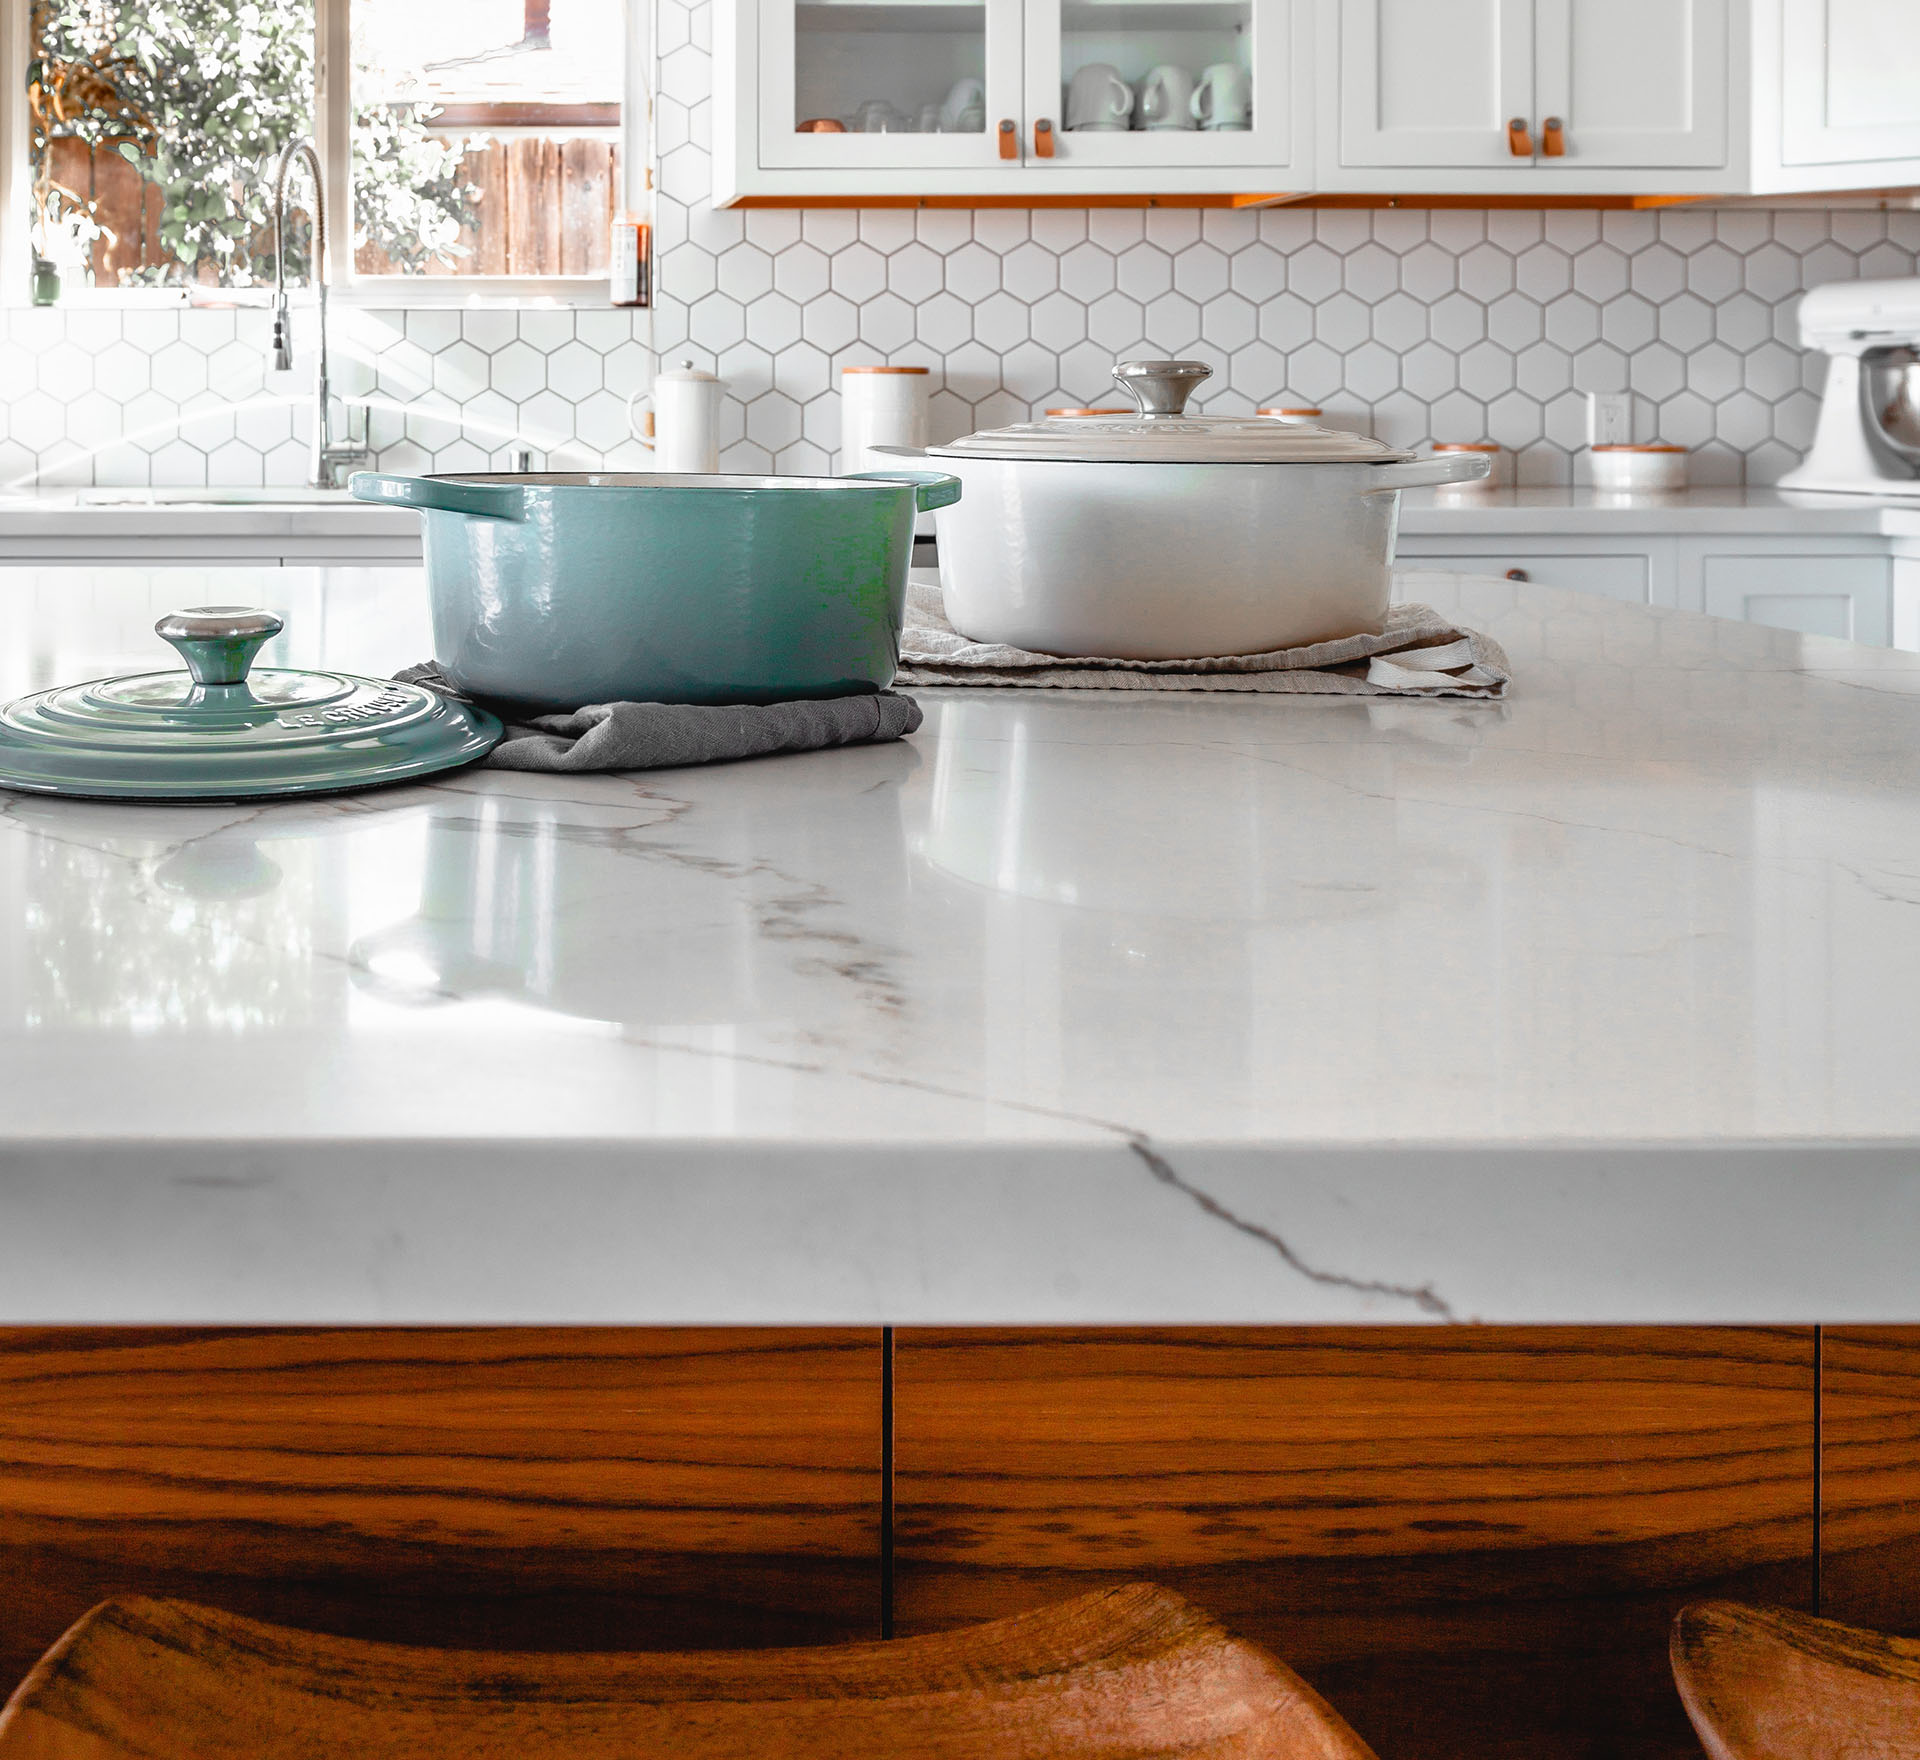 Image of a countertop with kitchen pots